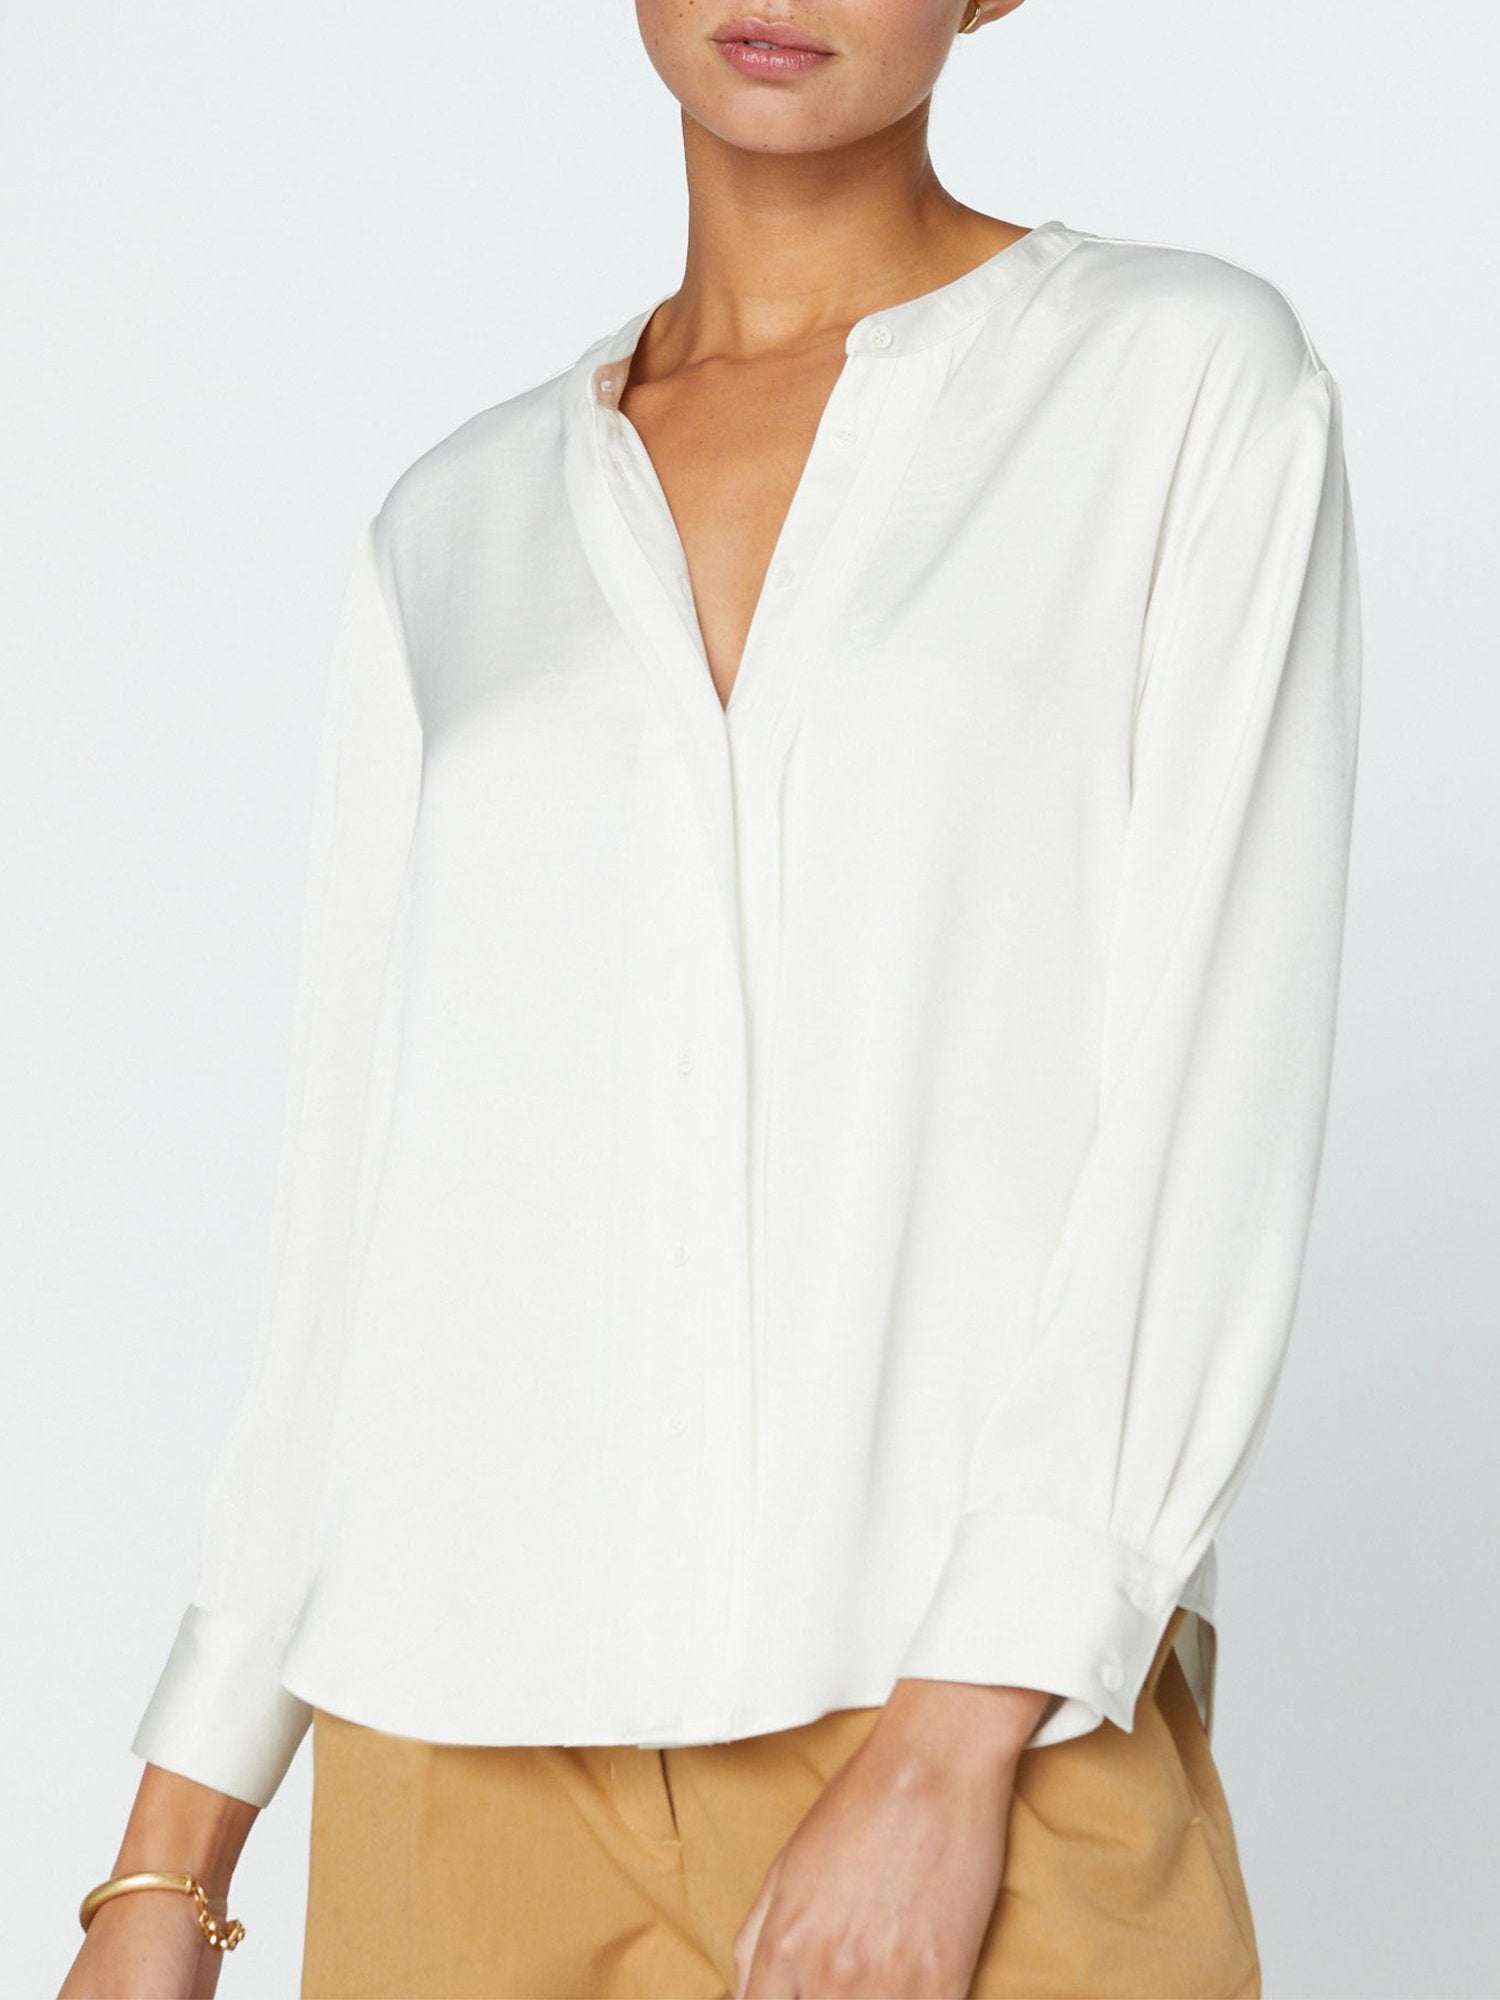 The Lillie Blouse